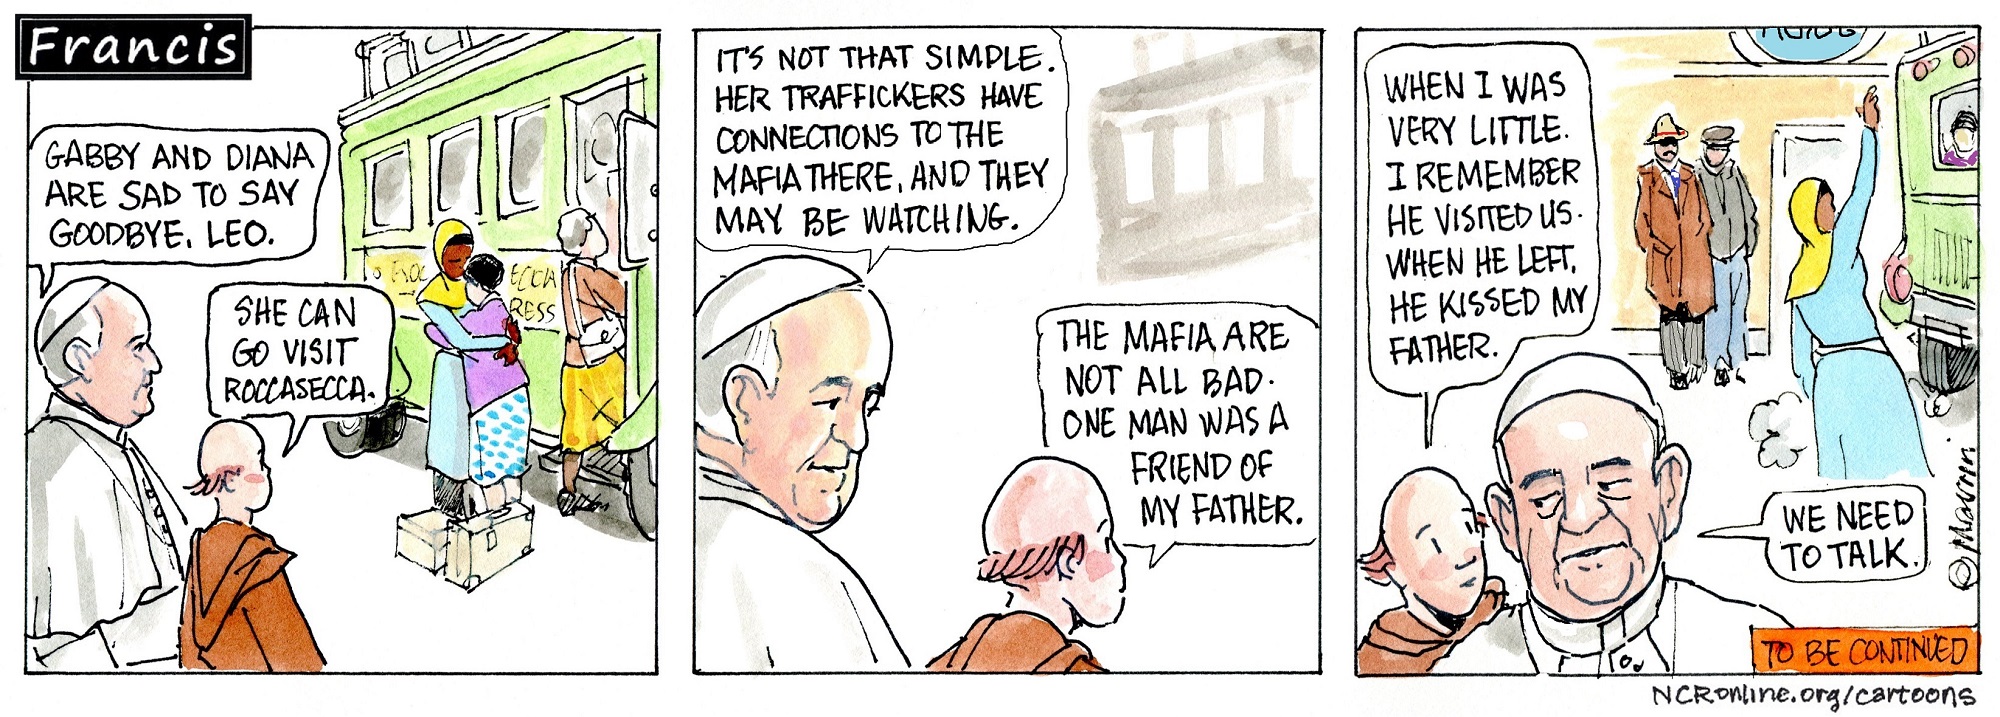 Francis, the comic strip: Diana heads home, and Gabby's going to miss her — but why can't she visit?